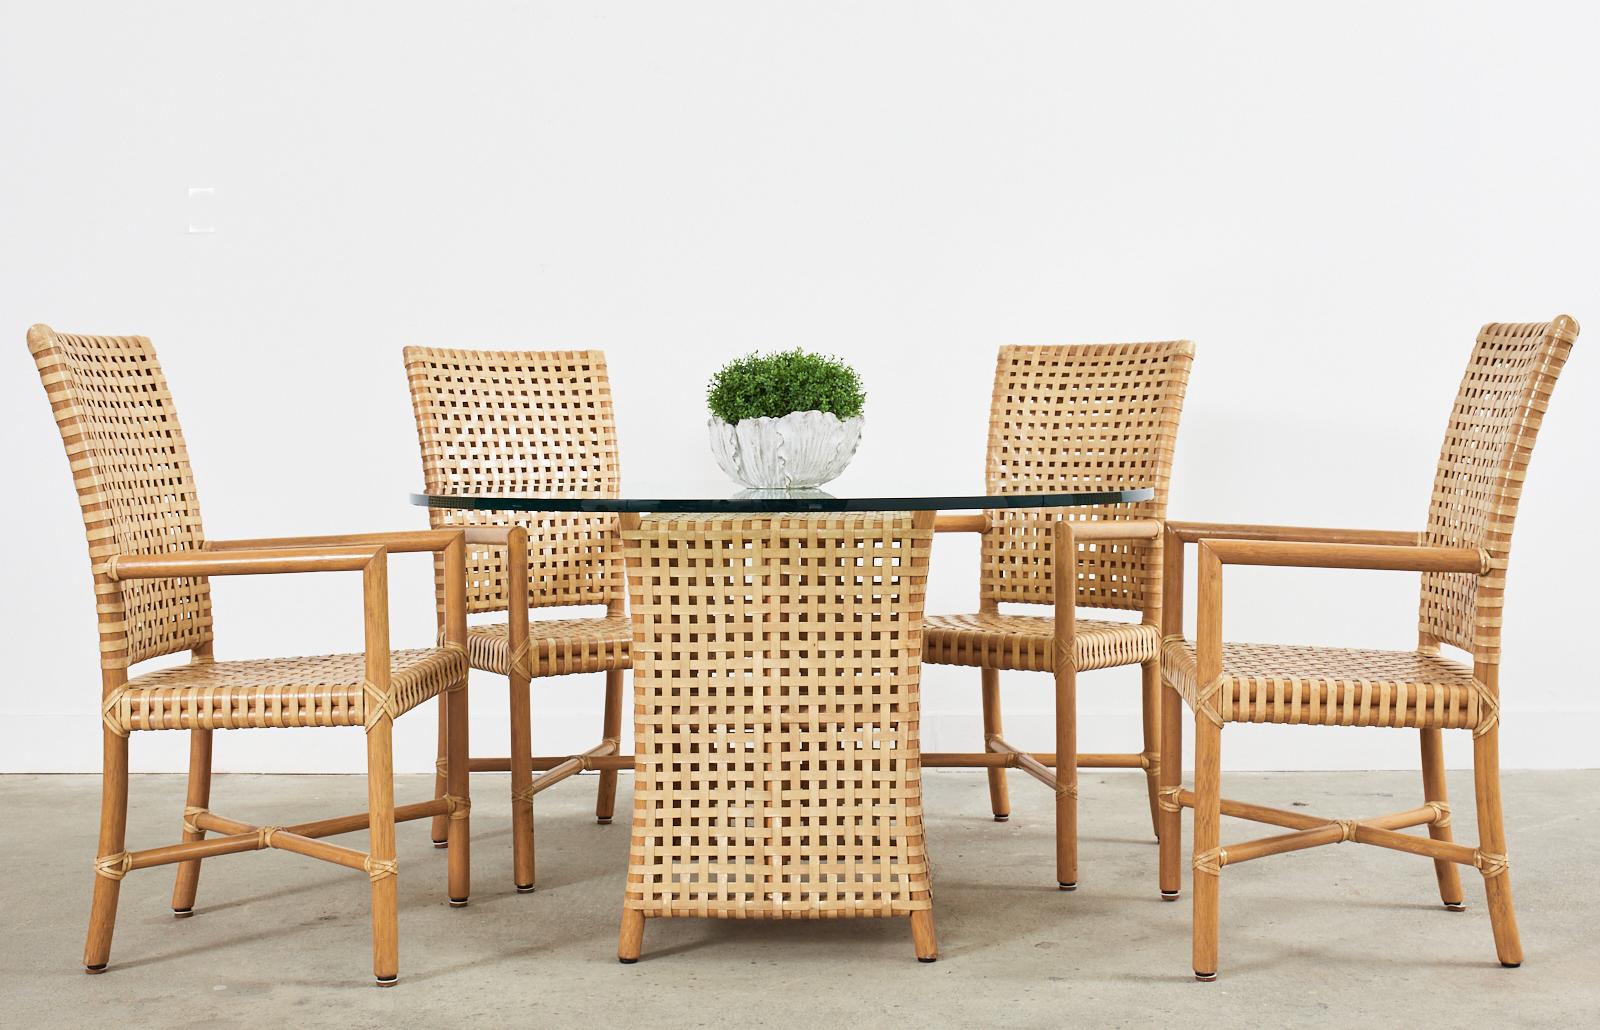 Rare set of four woven leather rawhide and rattan dining armchairs from McGuire's Antalya collection. Hand-crafted in the coastal California modern organic style featuring a thick rattan pole frame covered with a geometric pattern of woven lattice